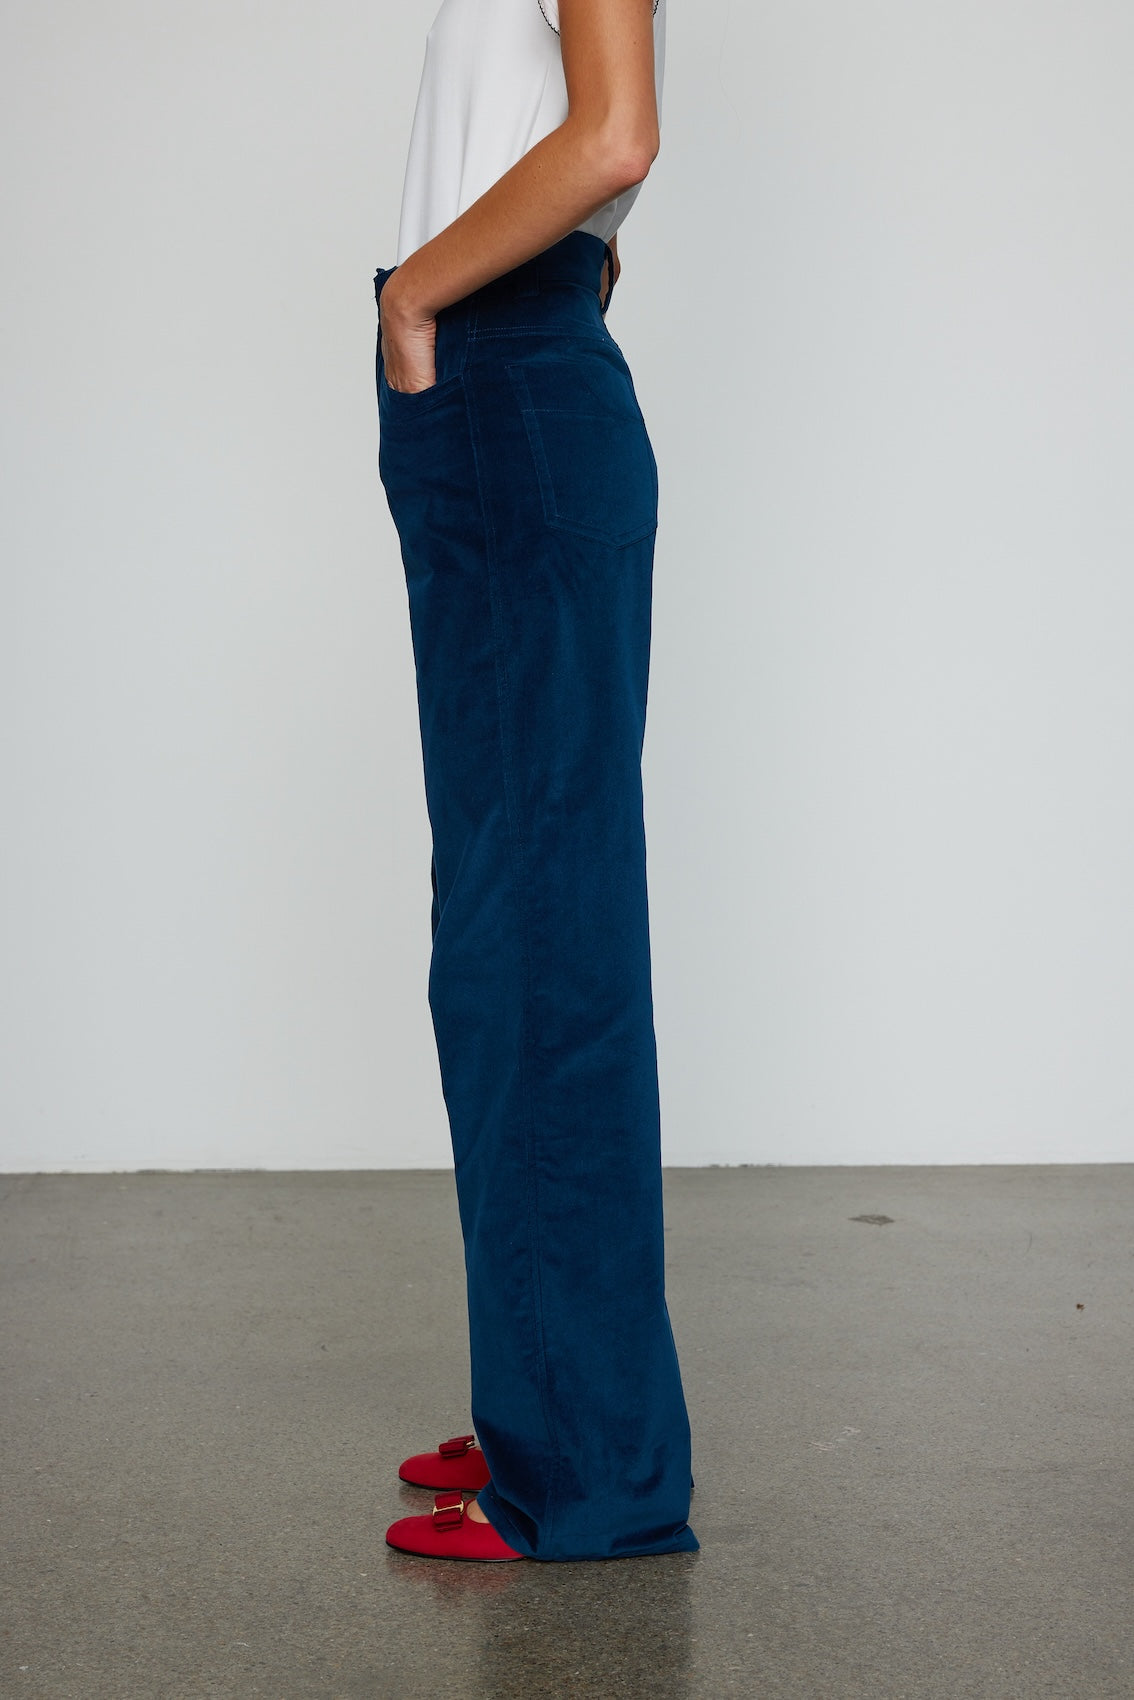 Caro Editions newest edition of the Annika Pants is made in rich cotton velvet. The style is high-waisted, column pants with extra long legs that can be turned up at the hem. Material: 100% Cotton.